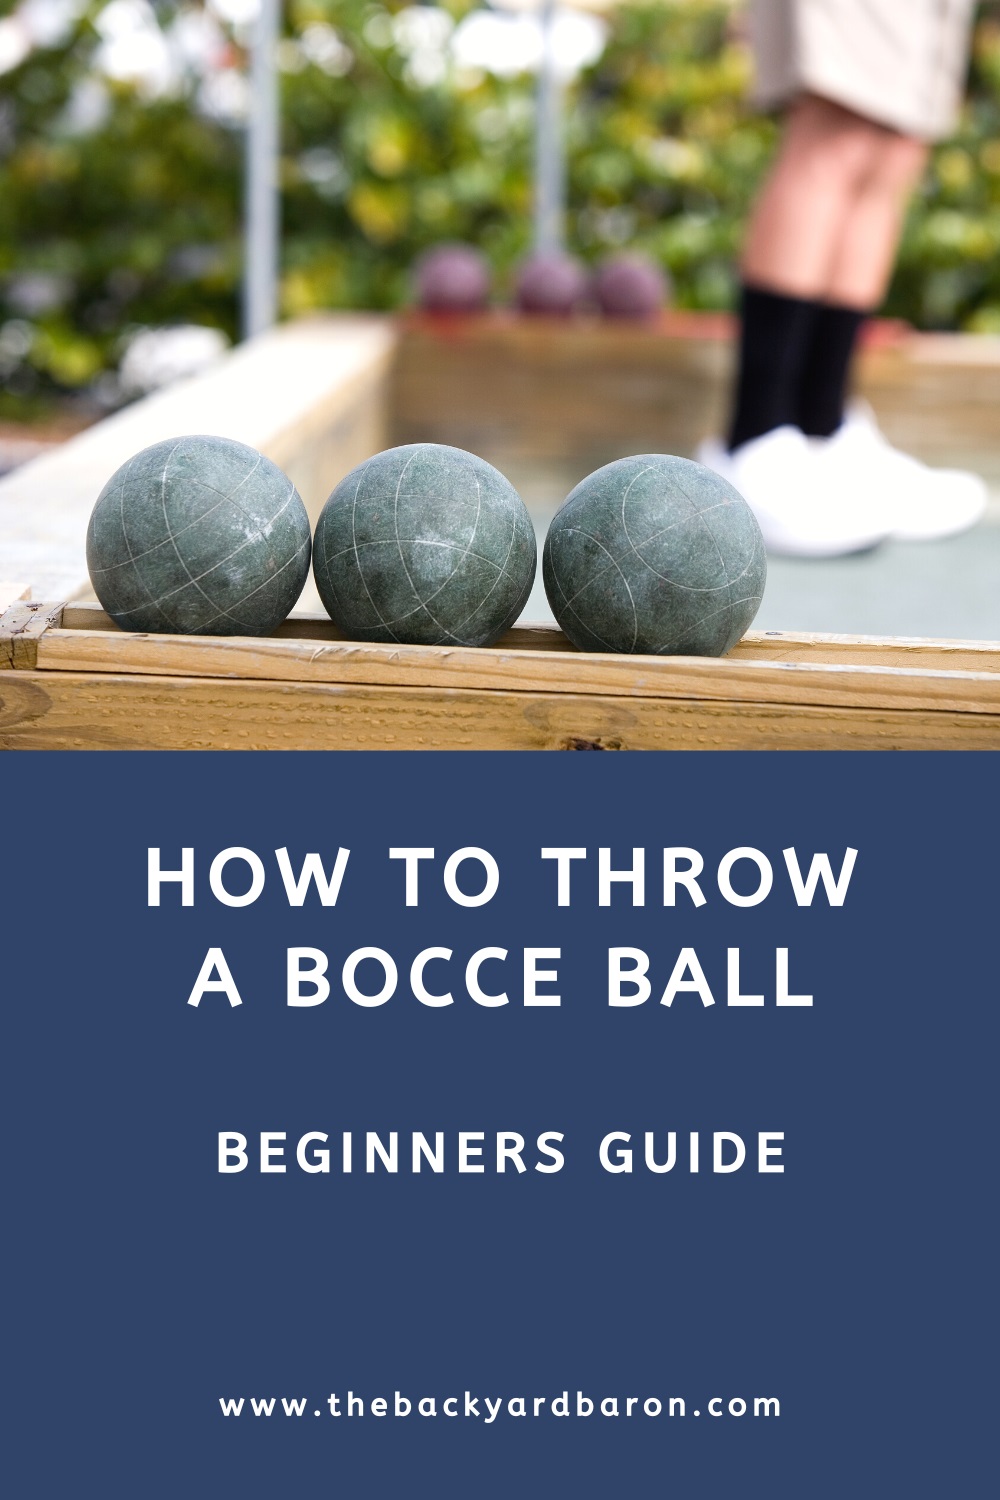 How to throw a bocce ball (beginners guide)